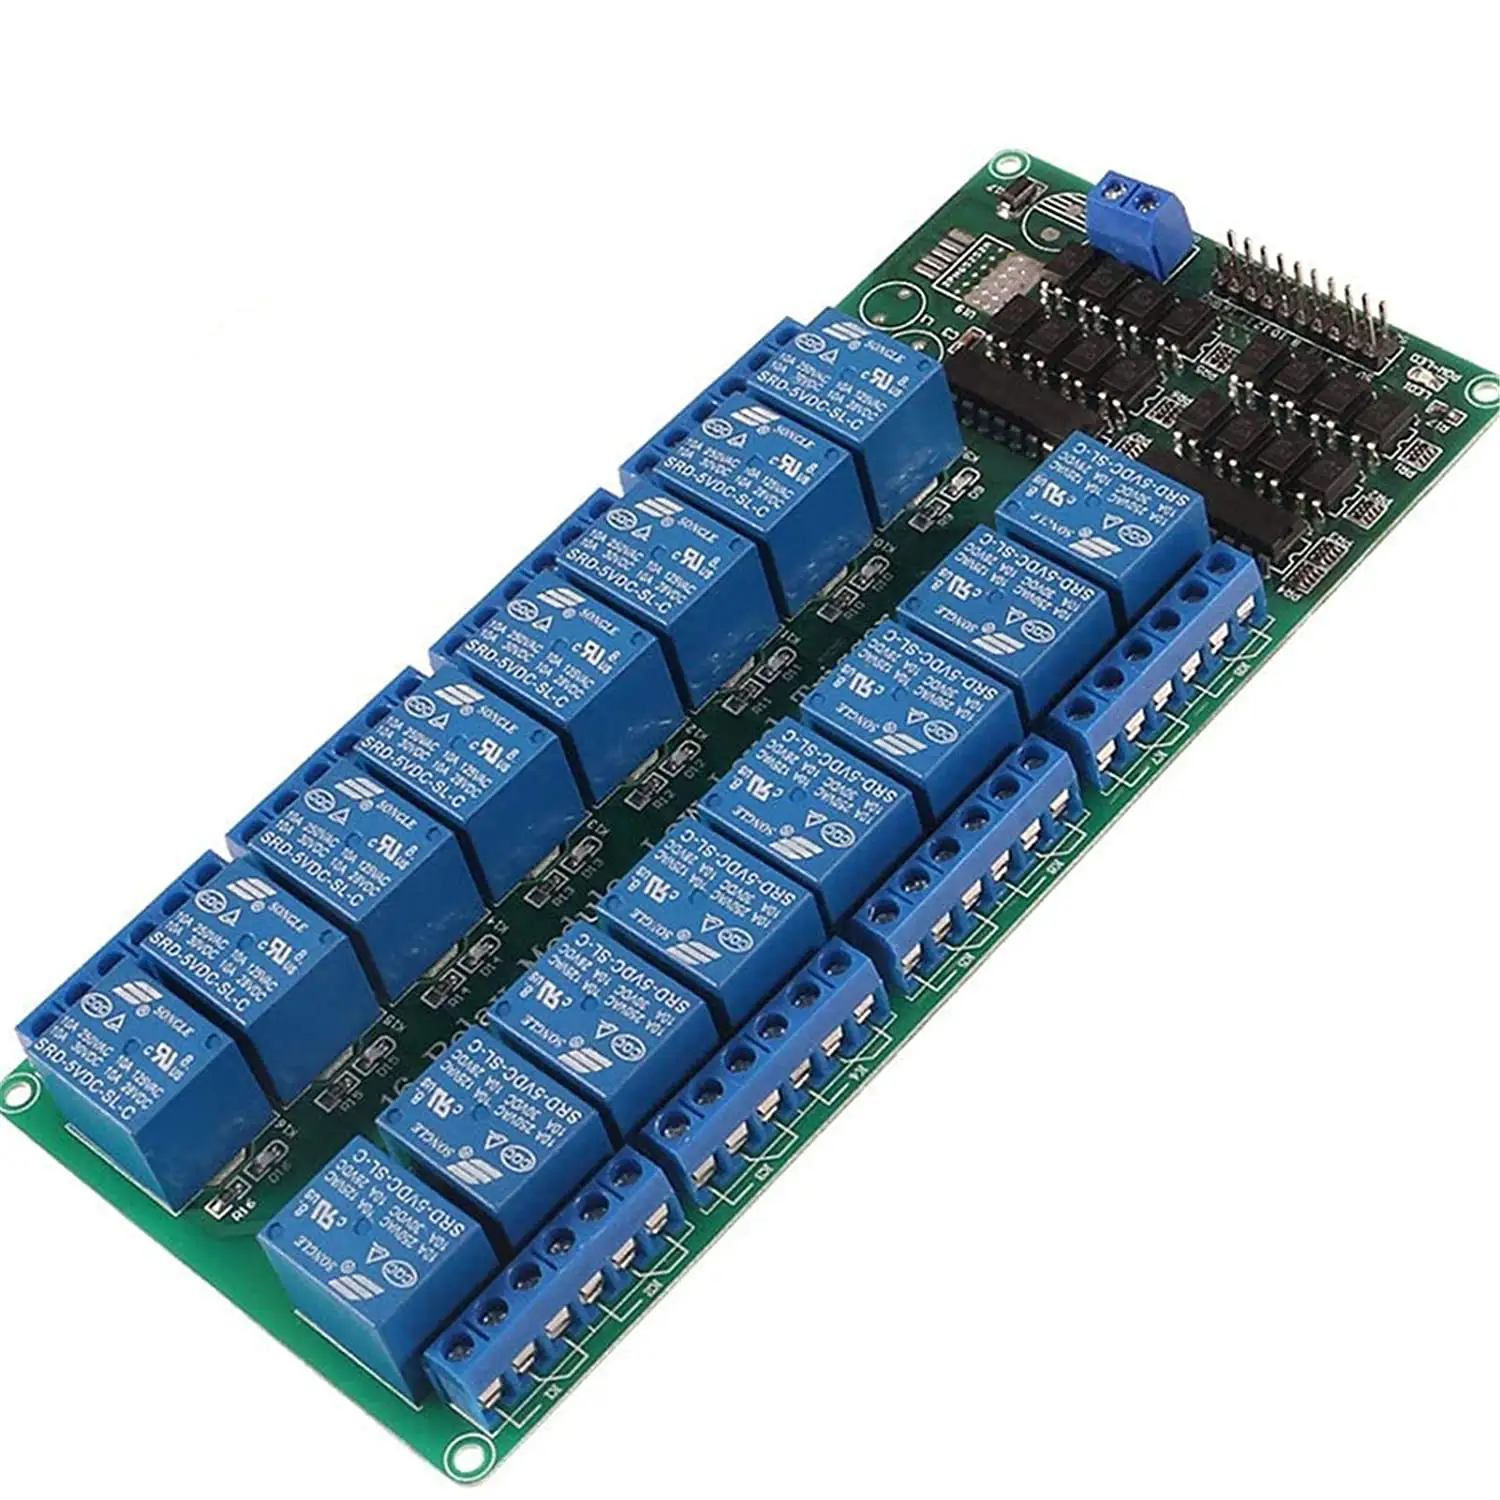 OEM/ODM 5V Relay With Optocoupler 16 Channel Relay Module